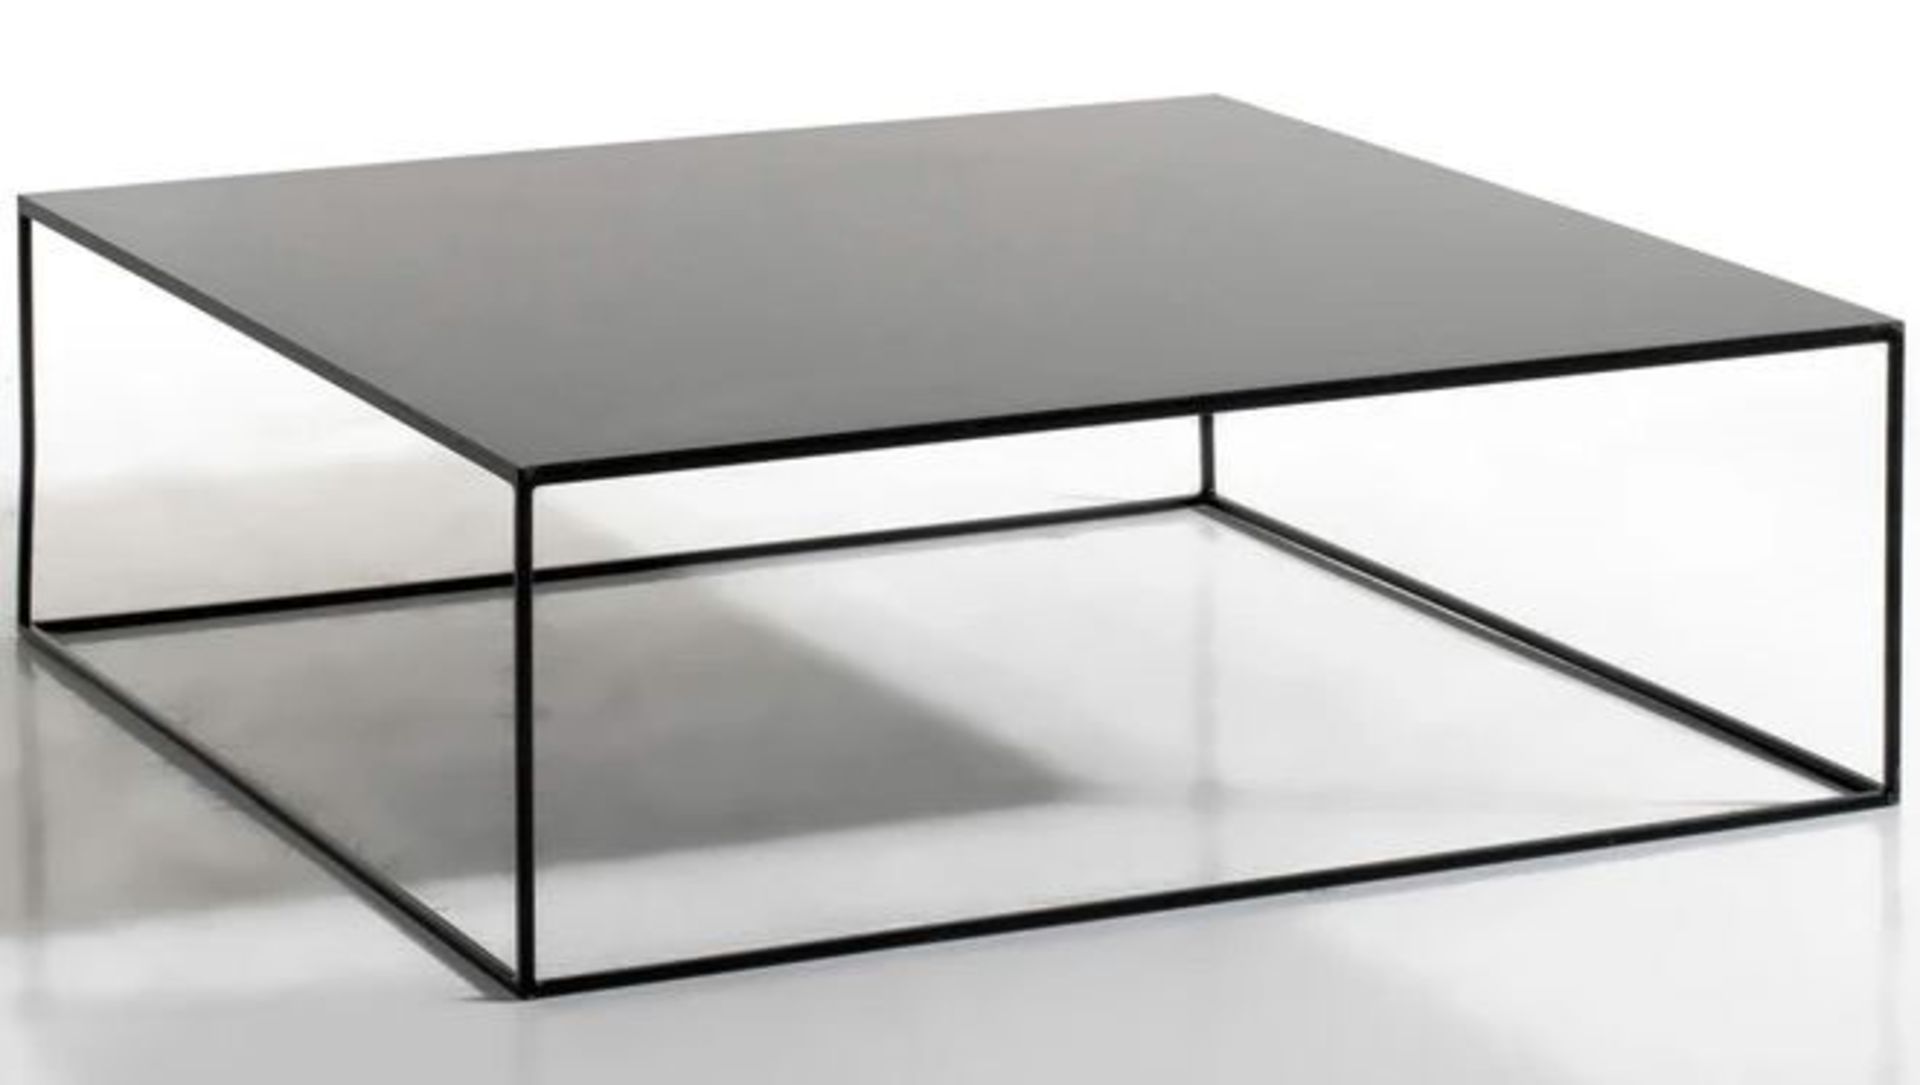 1 GRADE B ASSEMBLED DESIGNER ROMY SQUARE METAL COFFEE TABLE IN BLACK / RRP £350.00 (PUBLIC VIEWING